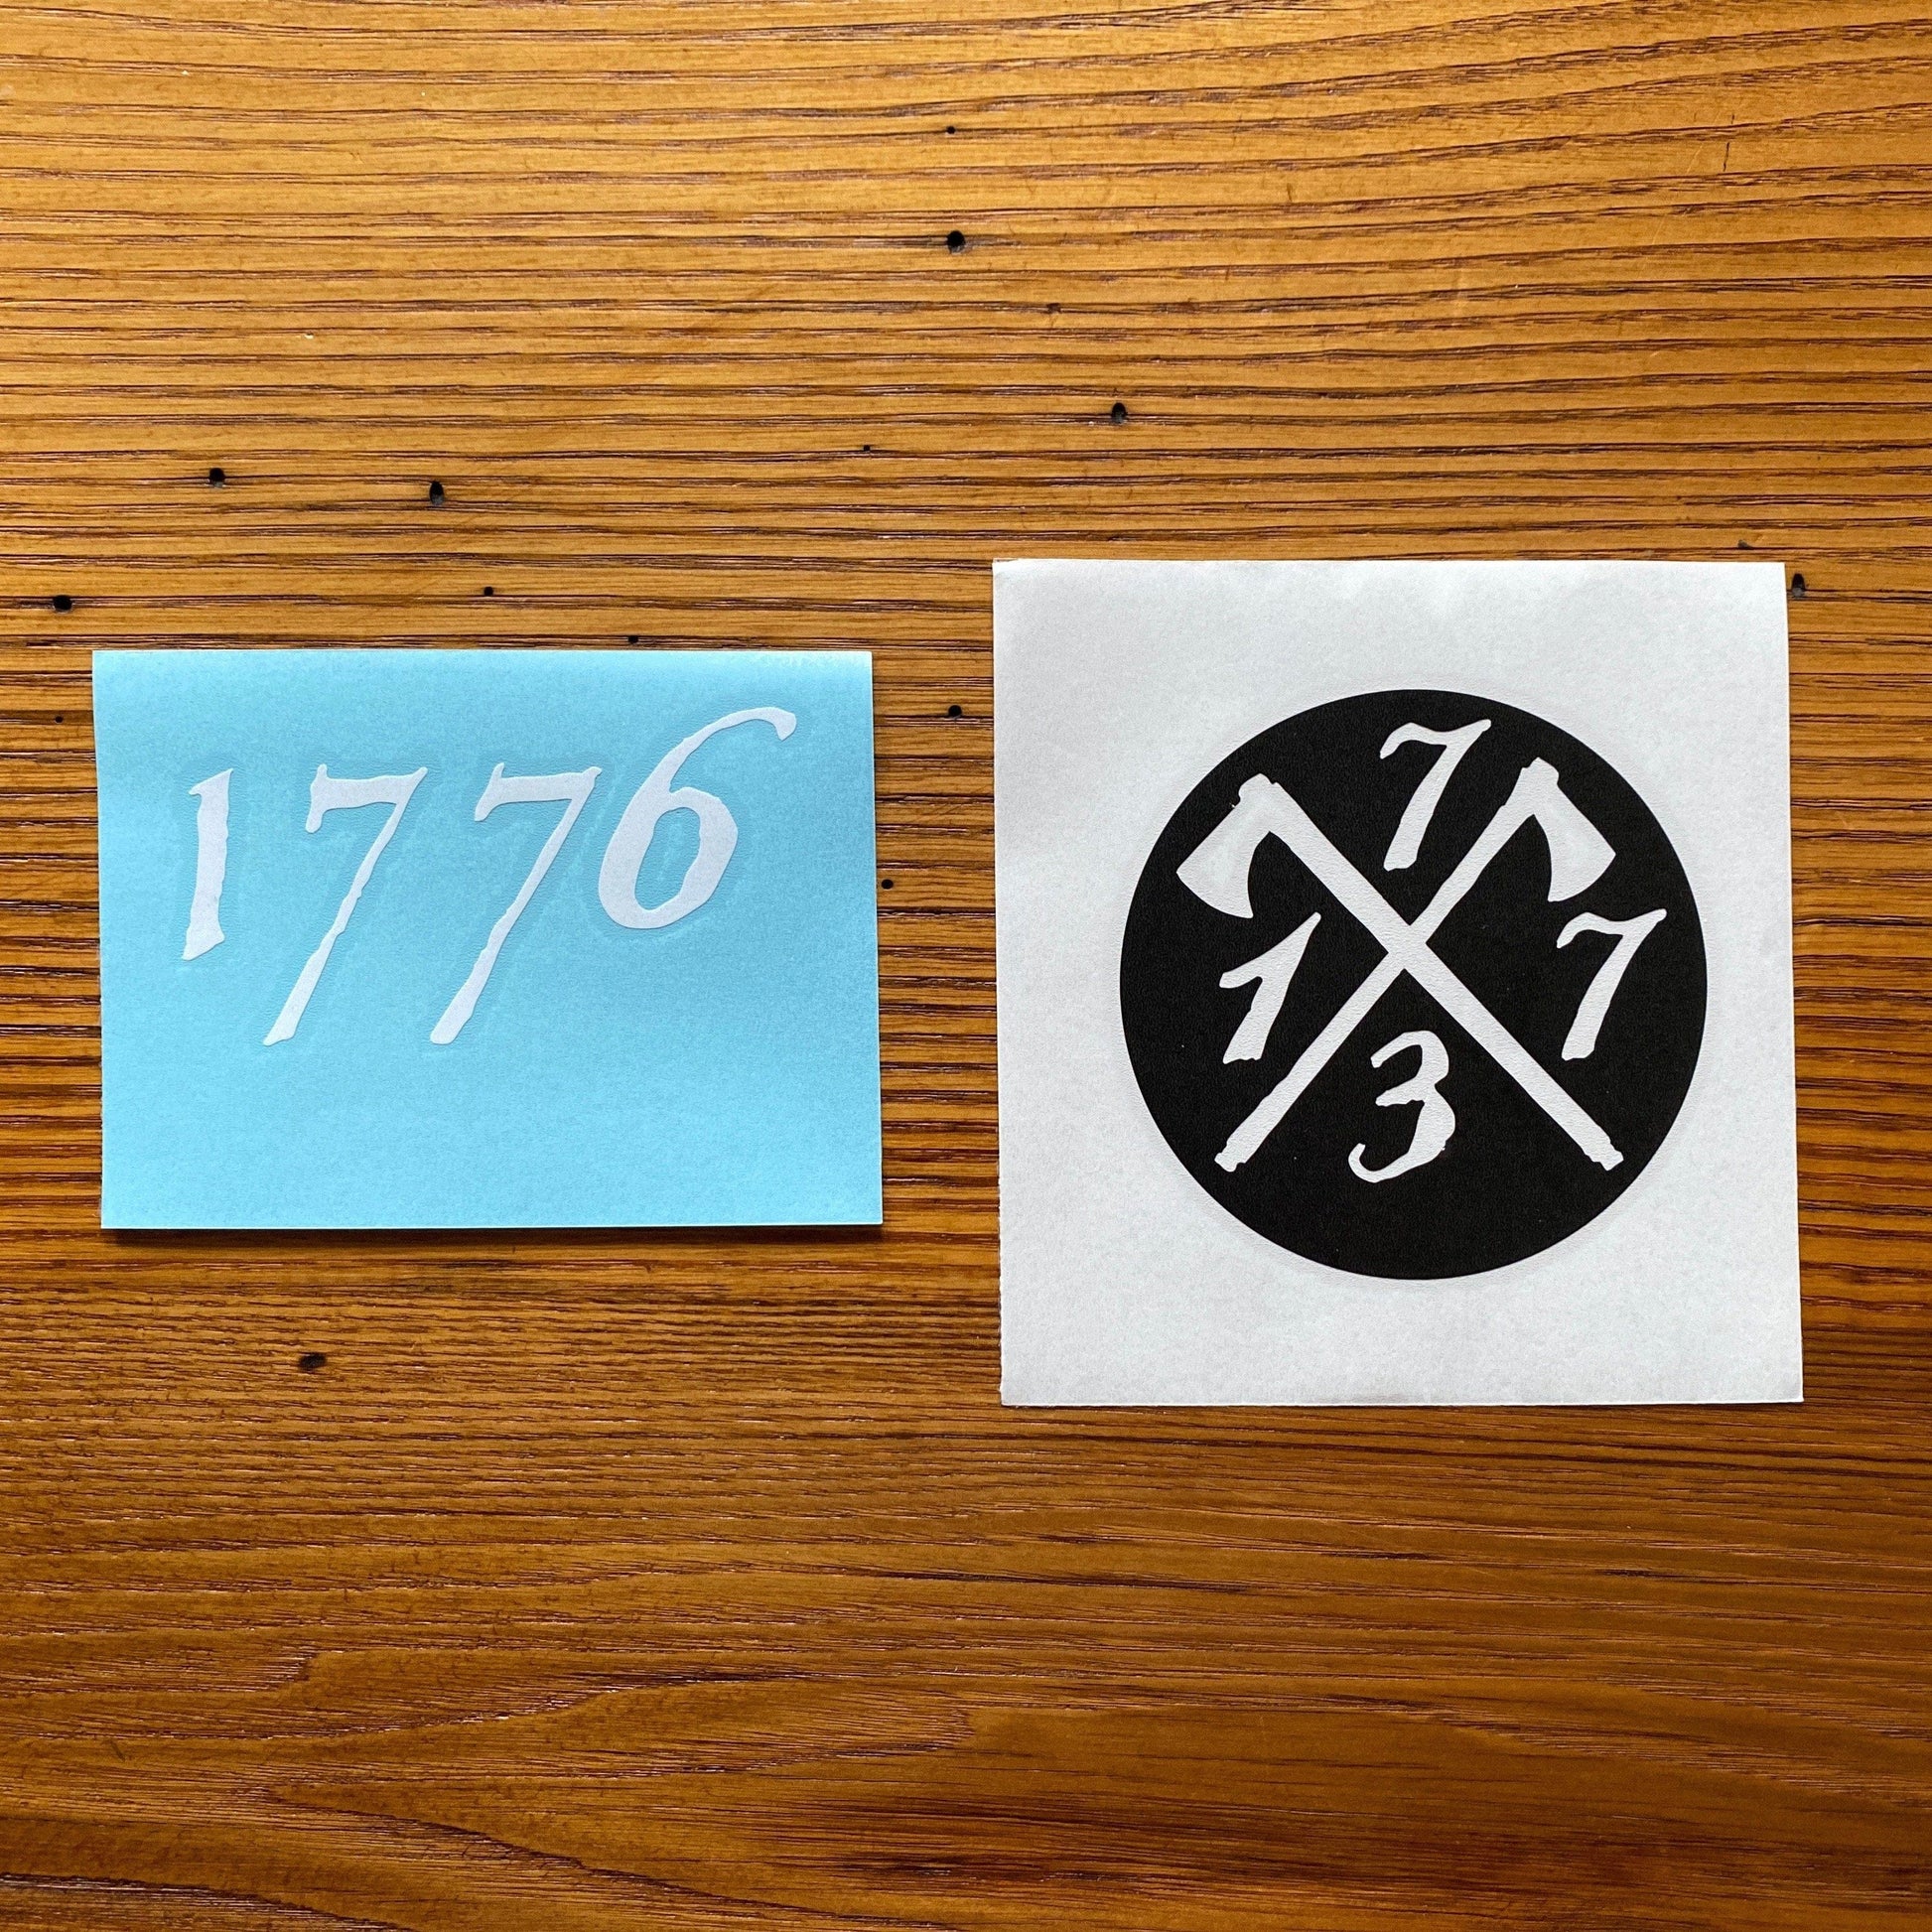 Black and White "1776" Vinyl Decal Sticker From the History List Store